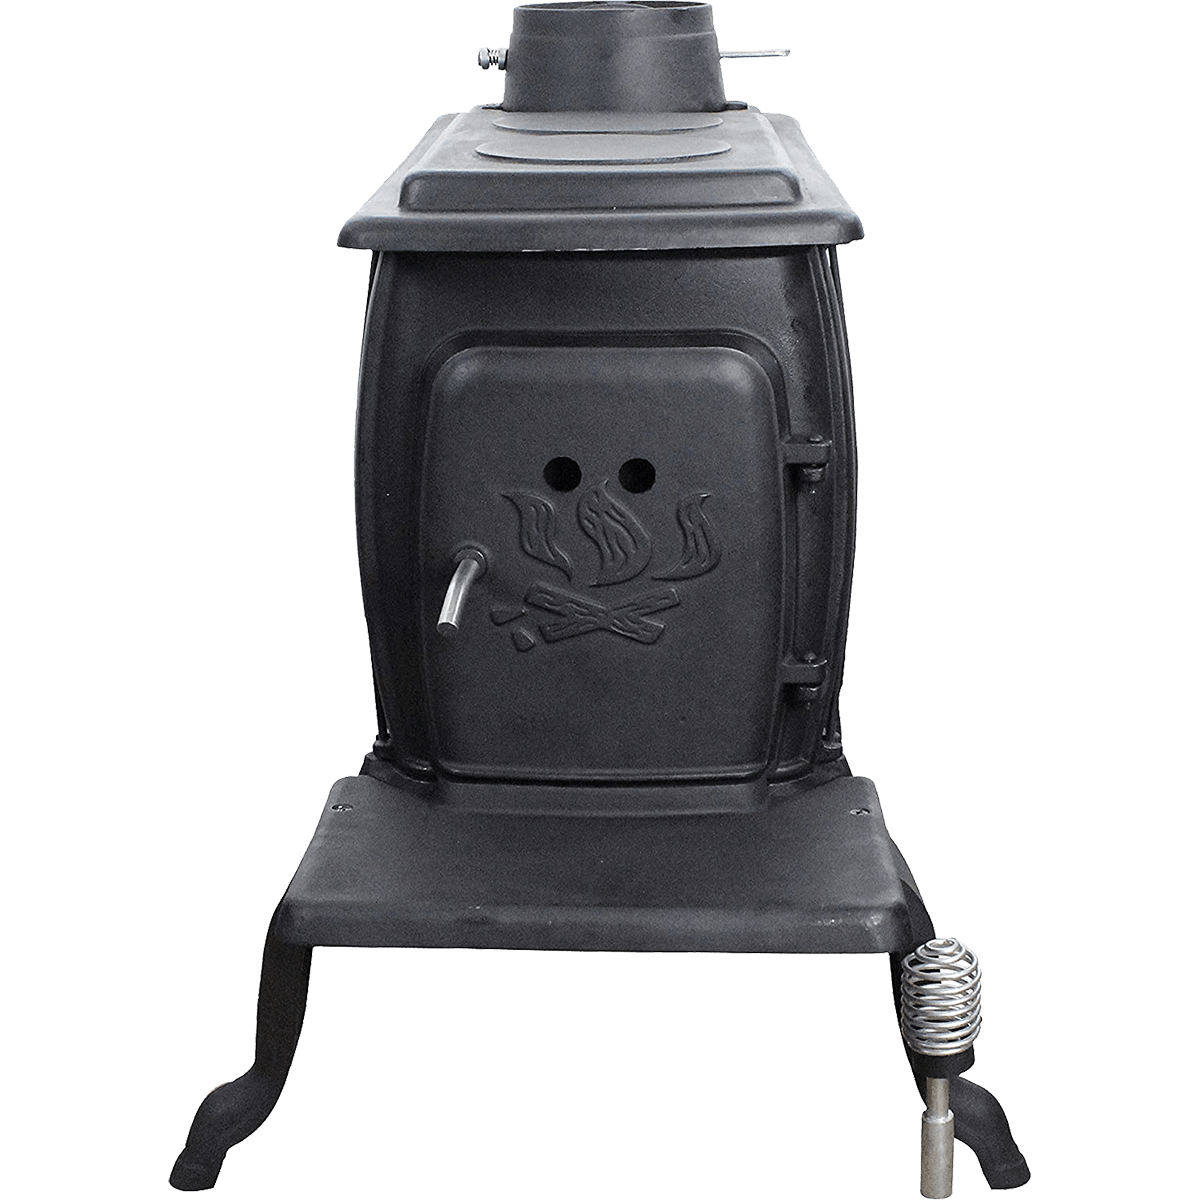 https://s3-assets.sylvane.com/media/images/products/us-stove-cast-iron-wood-stove-us1269e-front.png